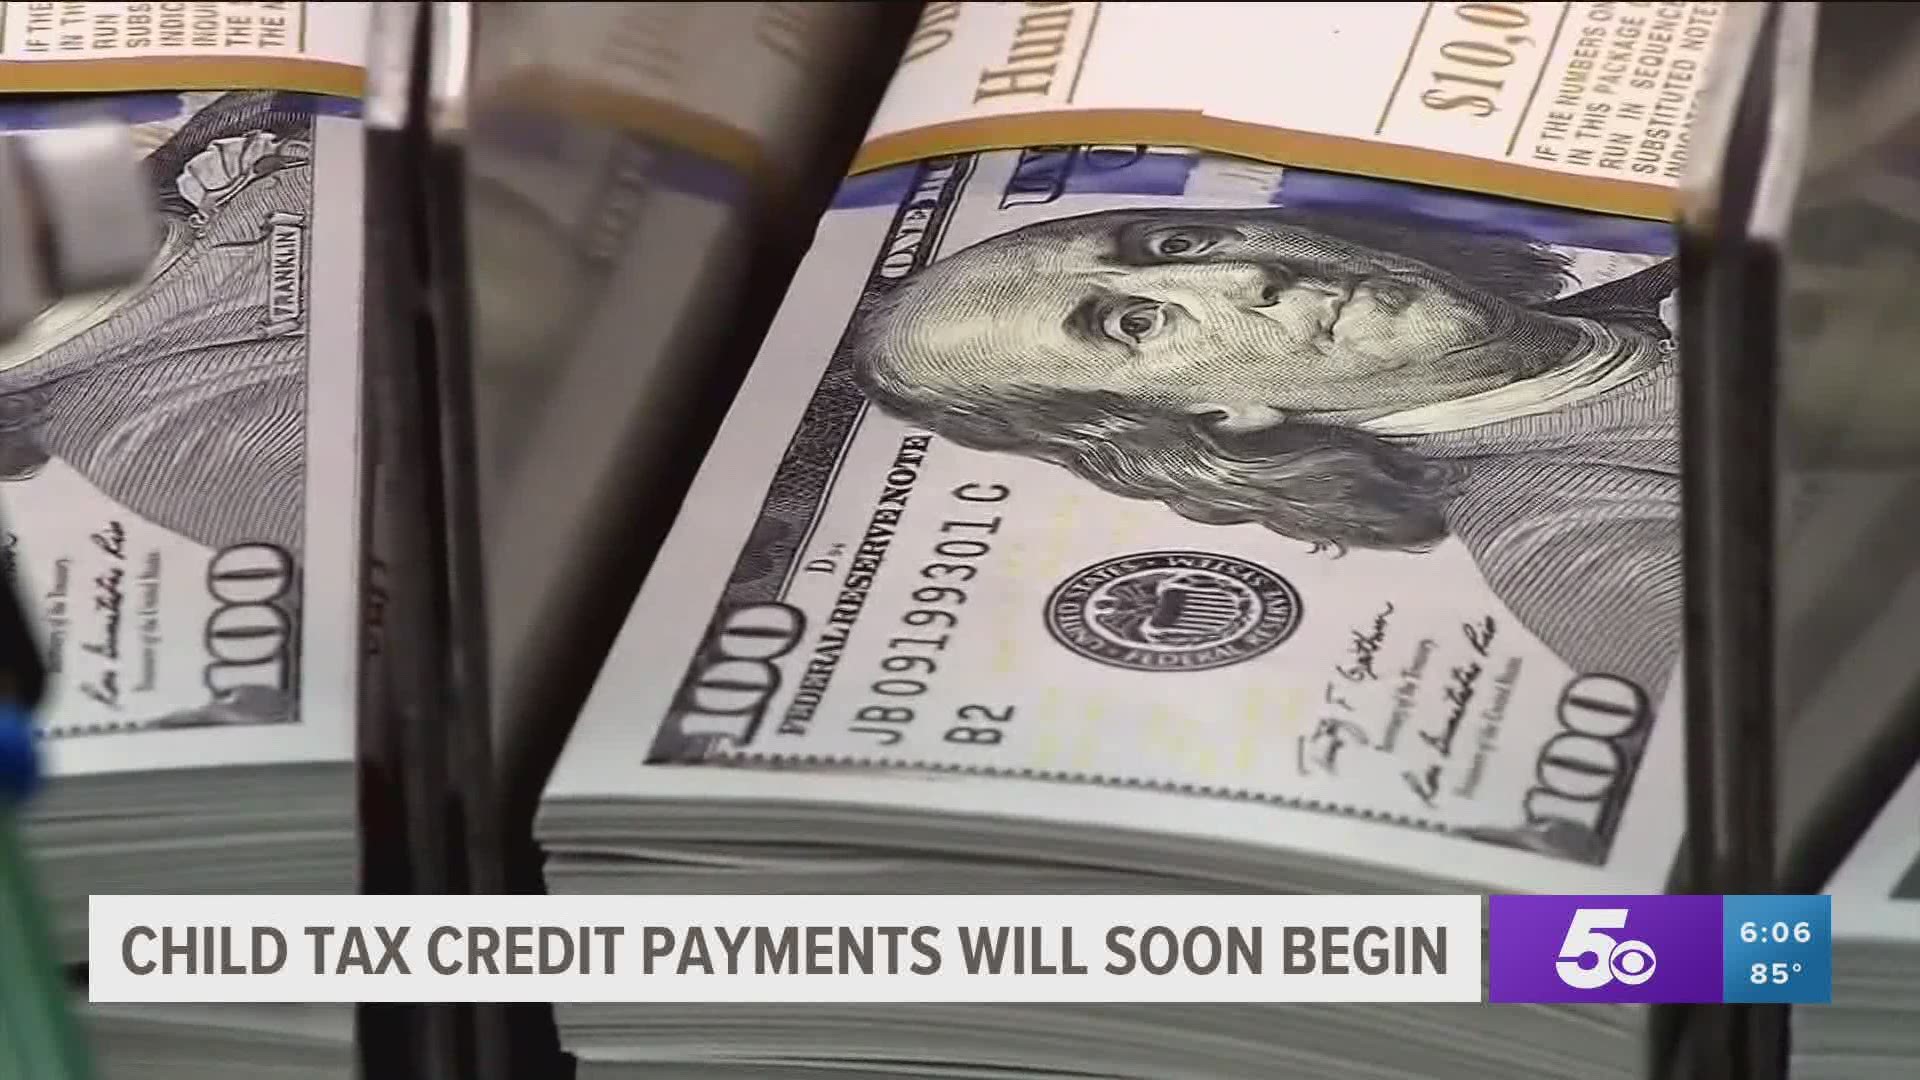 Those payments will start going out to qualifying families starting mid-July.